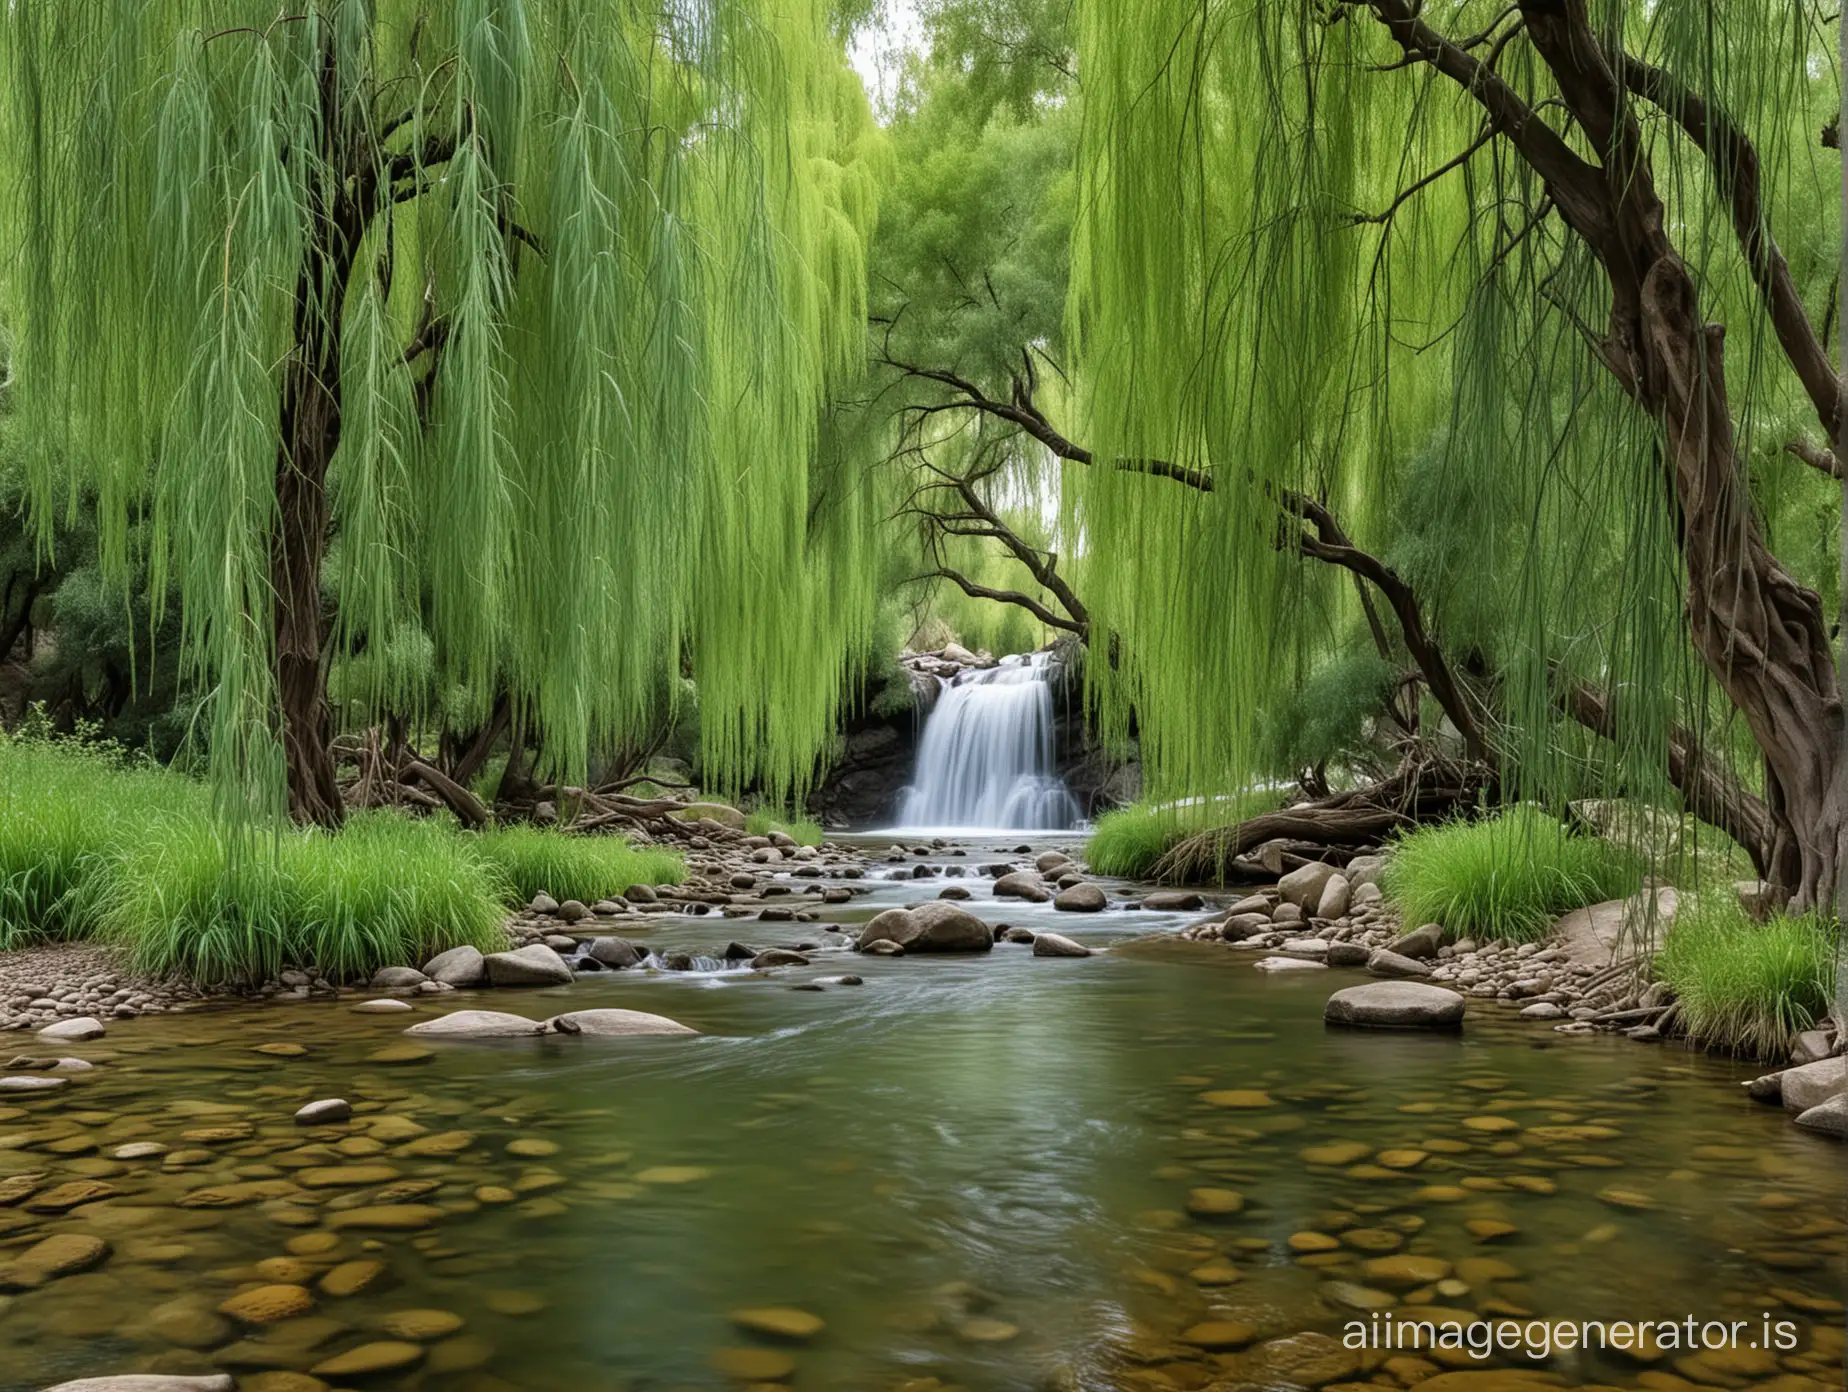 Stunning-Mountain-Stream-Scene-with-Majestic-Waterfall-and-Graceful-Weeping-Willows